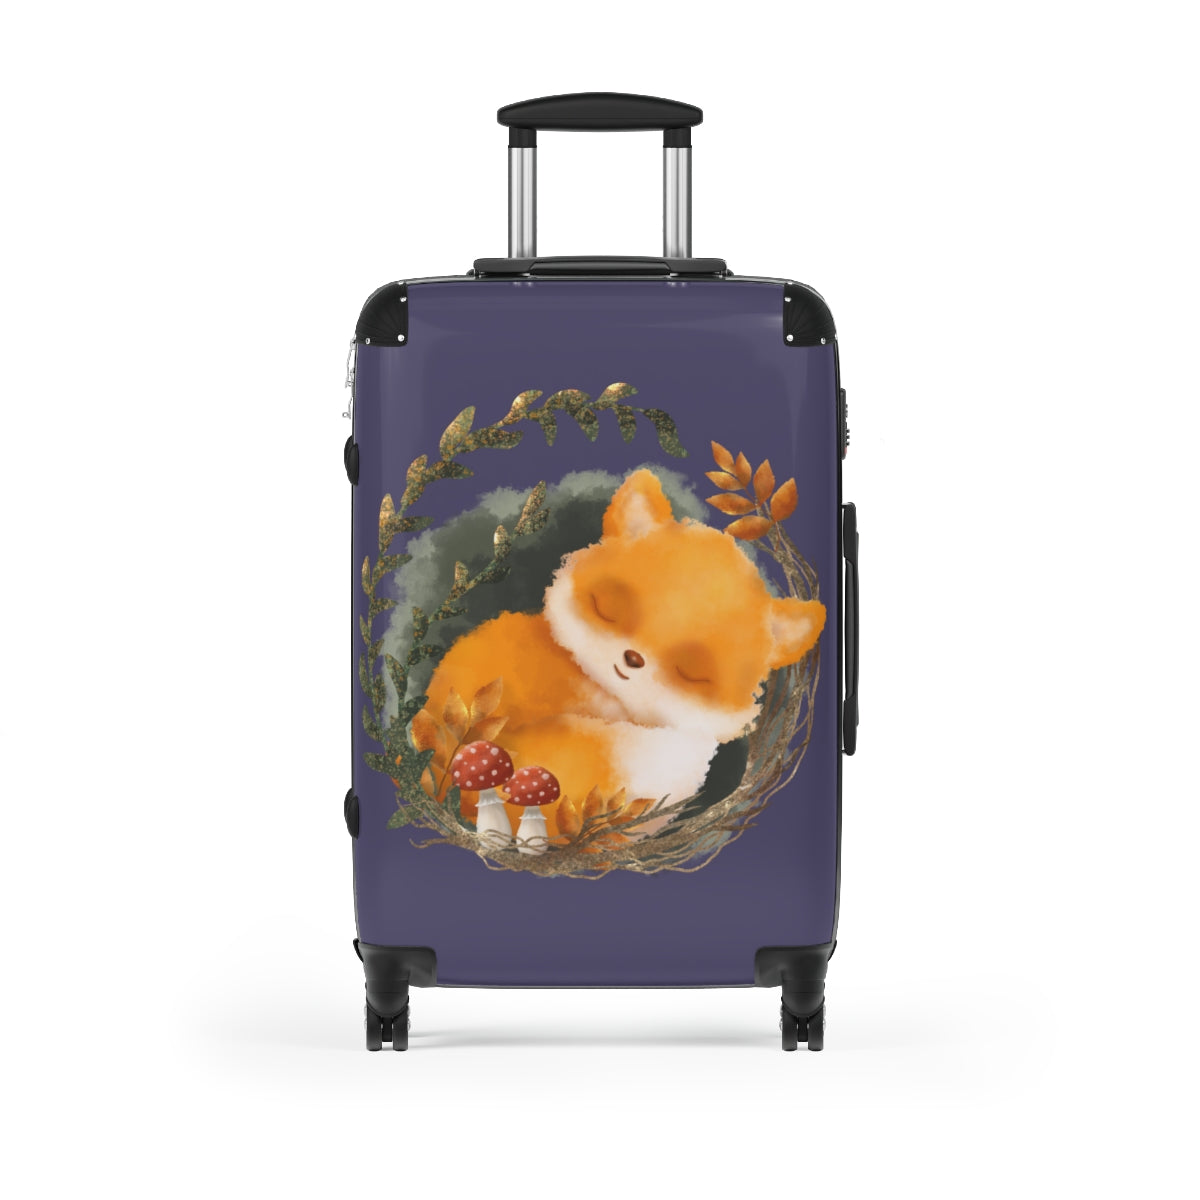 KIDS CARRY-ON Suitcases, Cat Cabin Suitcases, Kids Luggage With Wheels, Spinner, Combination Lock | Artzira